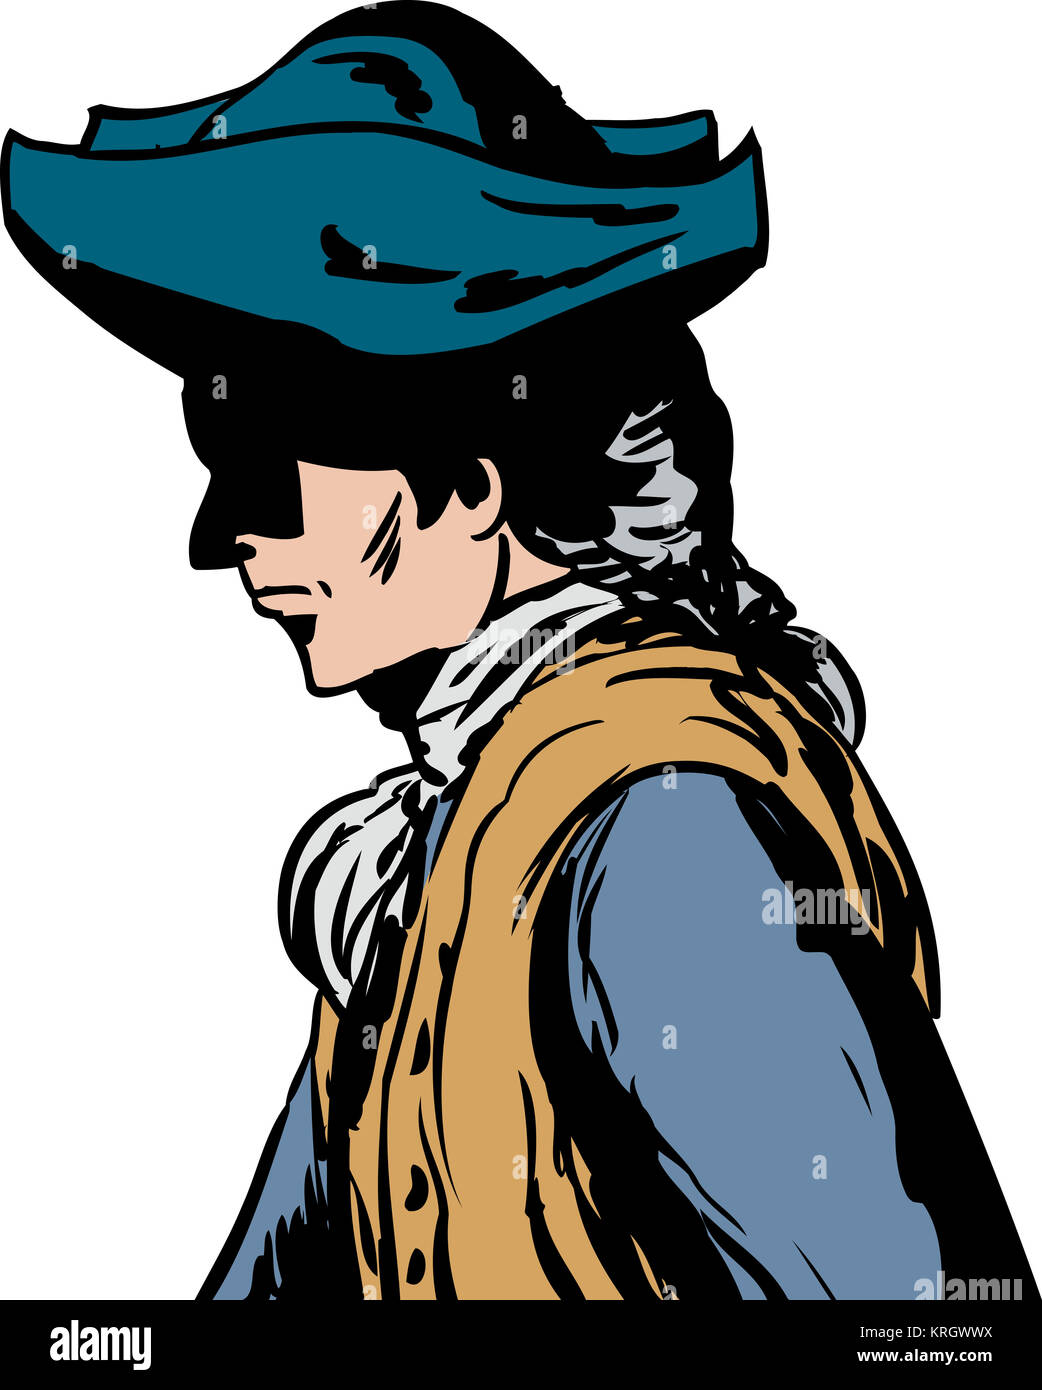 Side view of man in tricorn hat Stock Photo